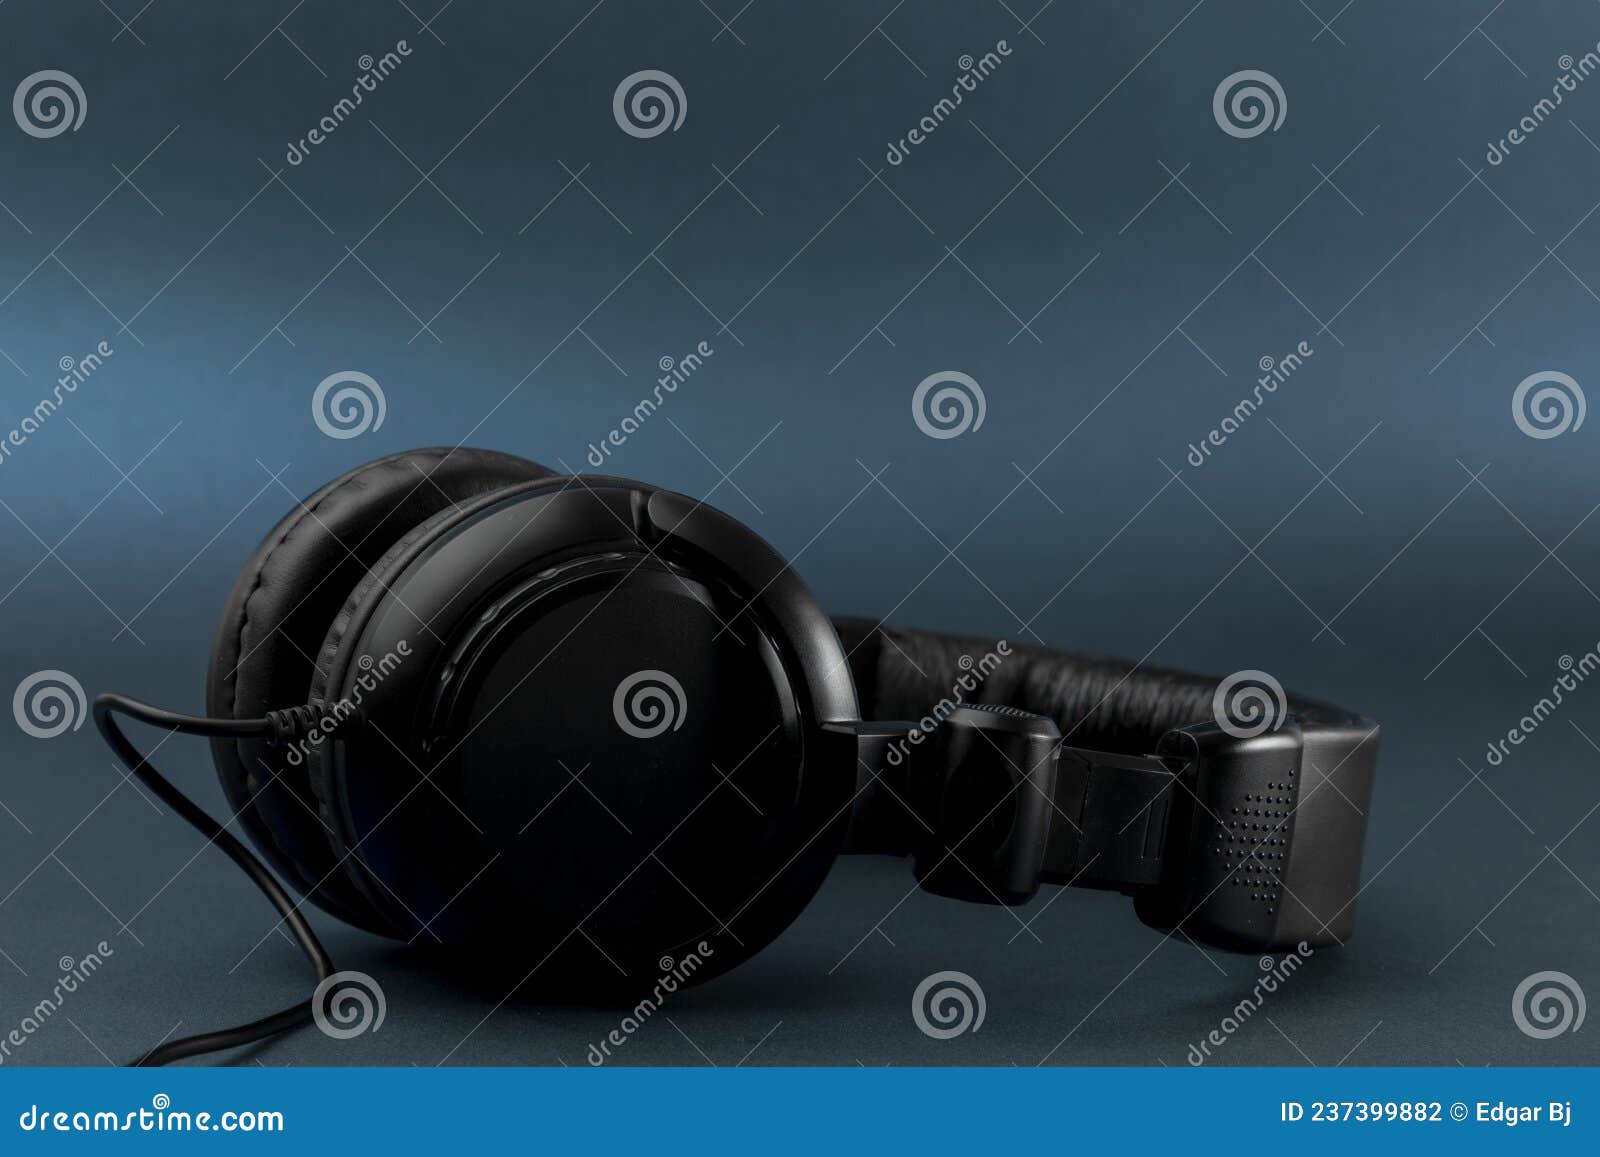 black studio headphones with blue background and space for text